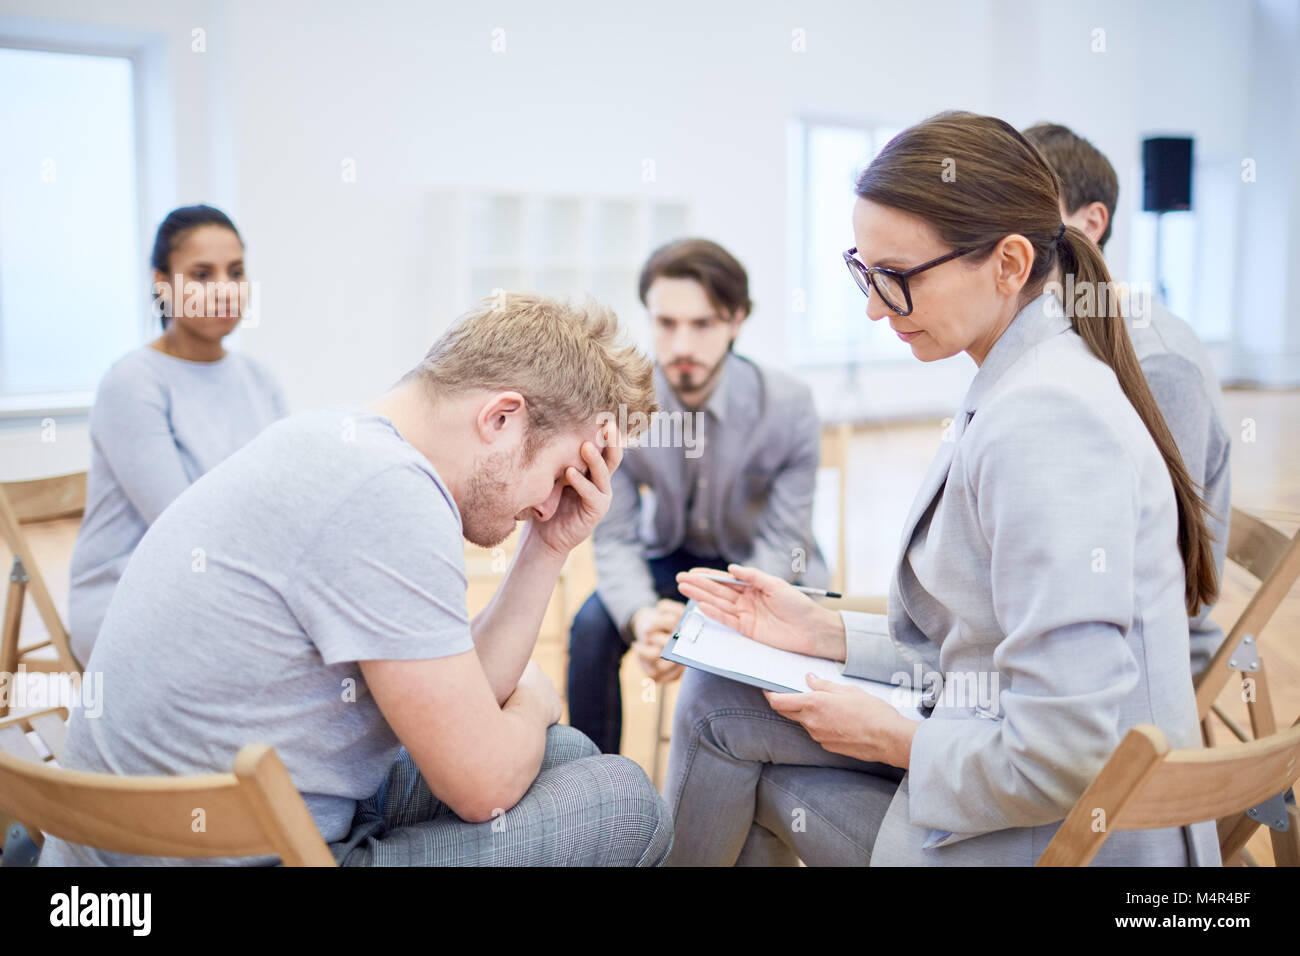 Man with problems Stock Photo